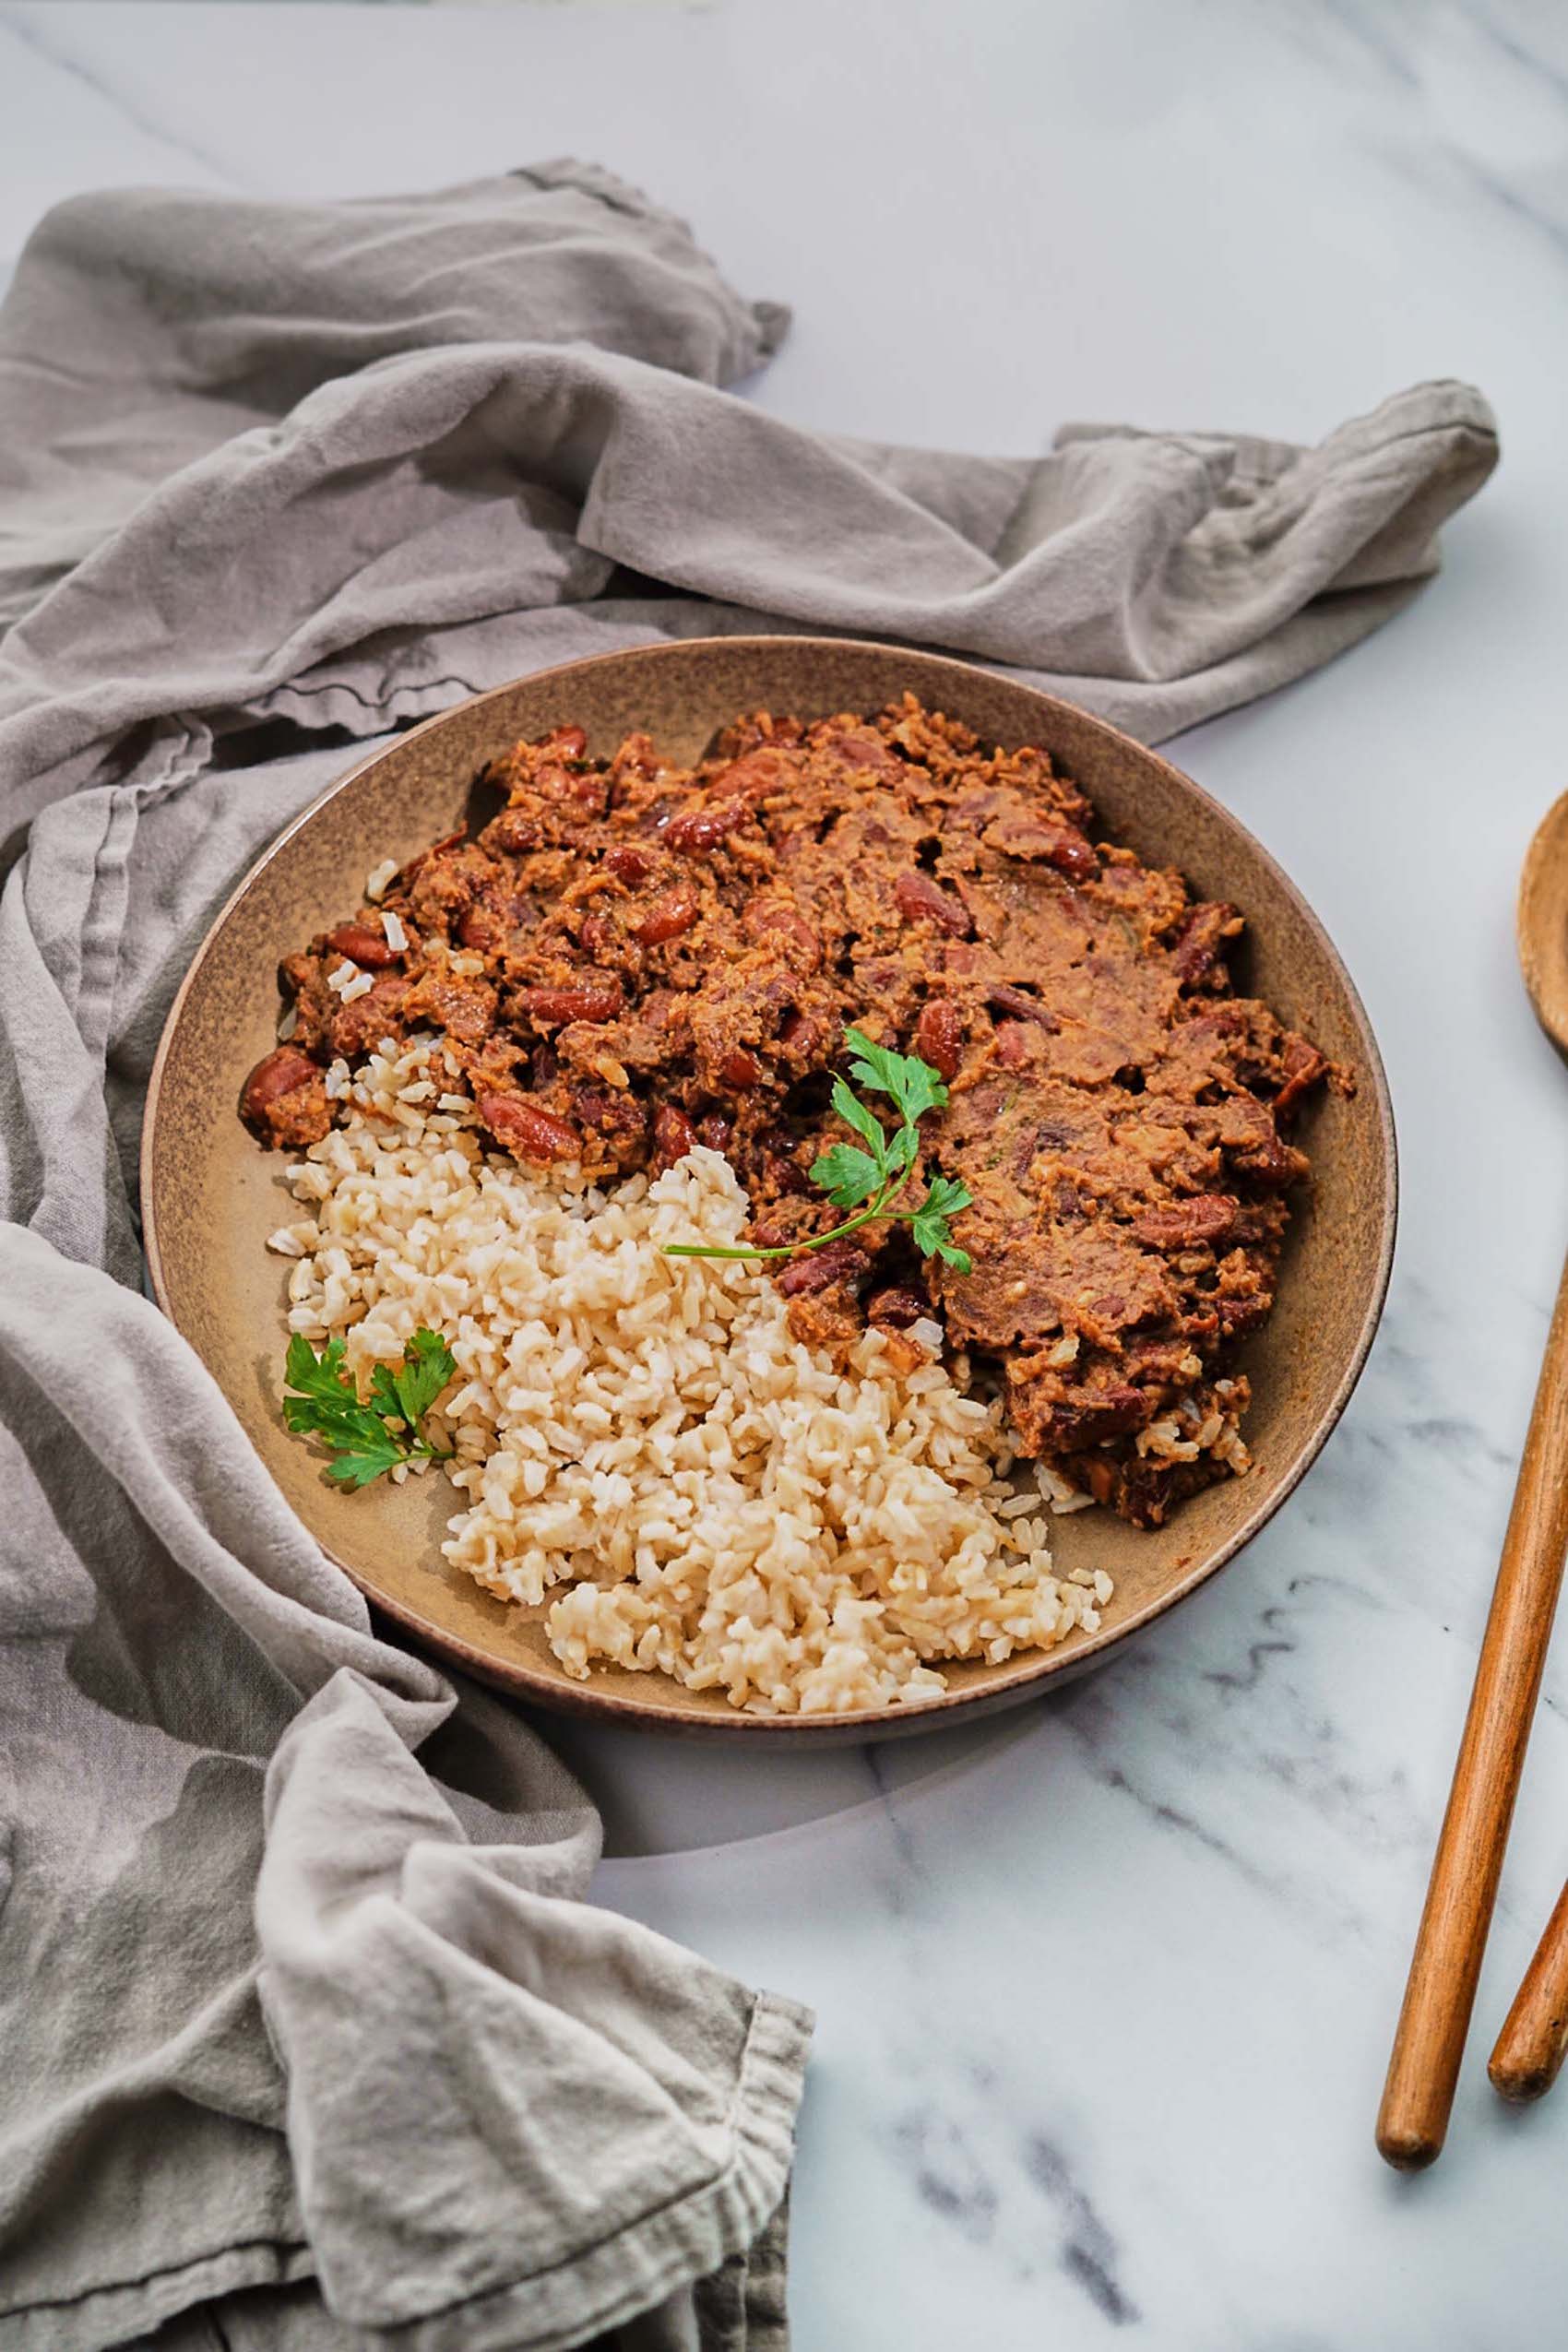 https://www.emilieeats.com/wp-content/uploads/2016/09/cajun-style-red-beans-and-rice-6.jpg